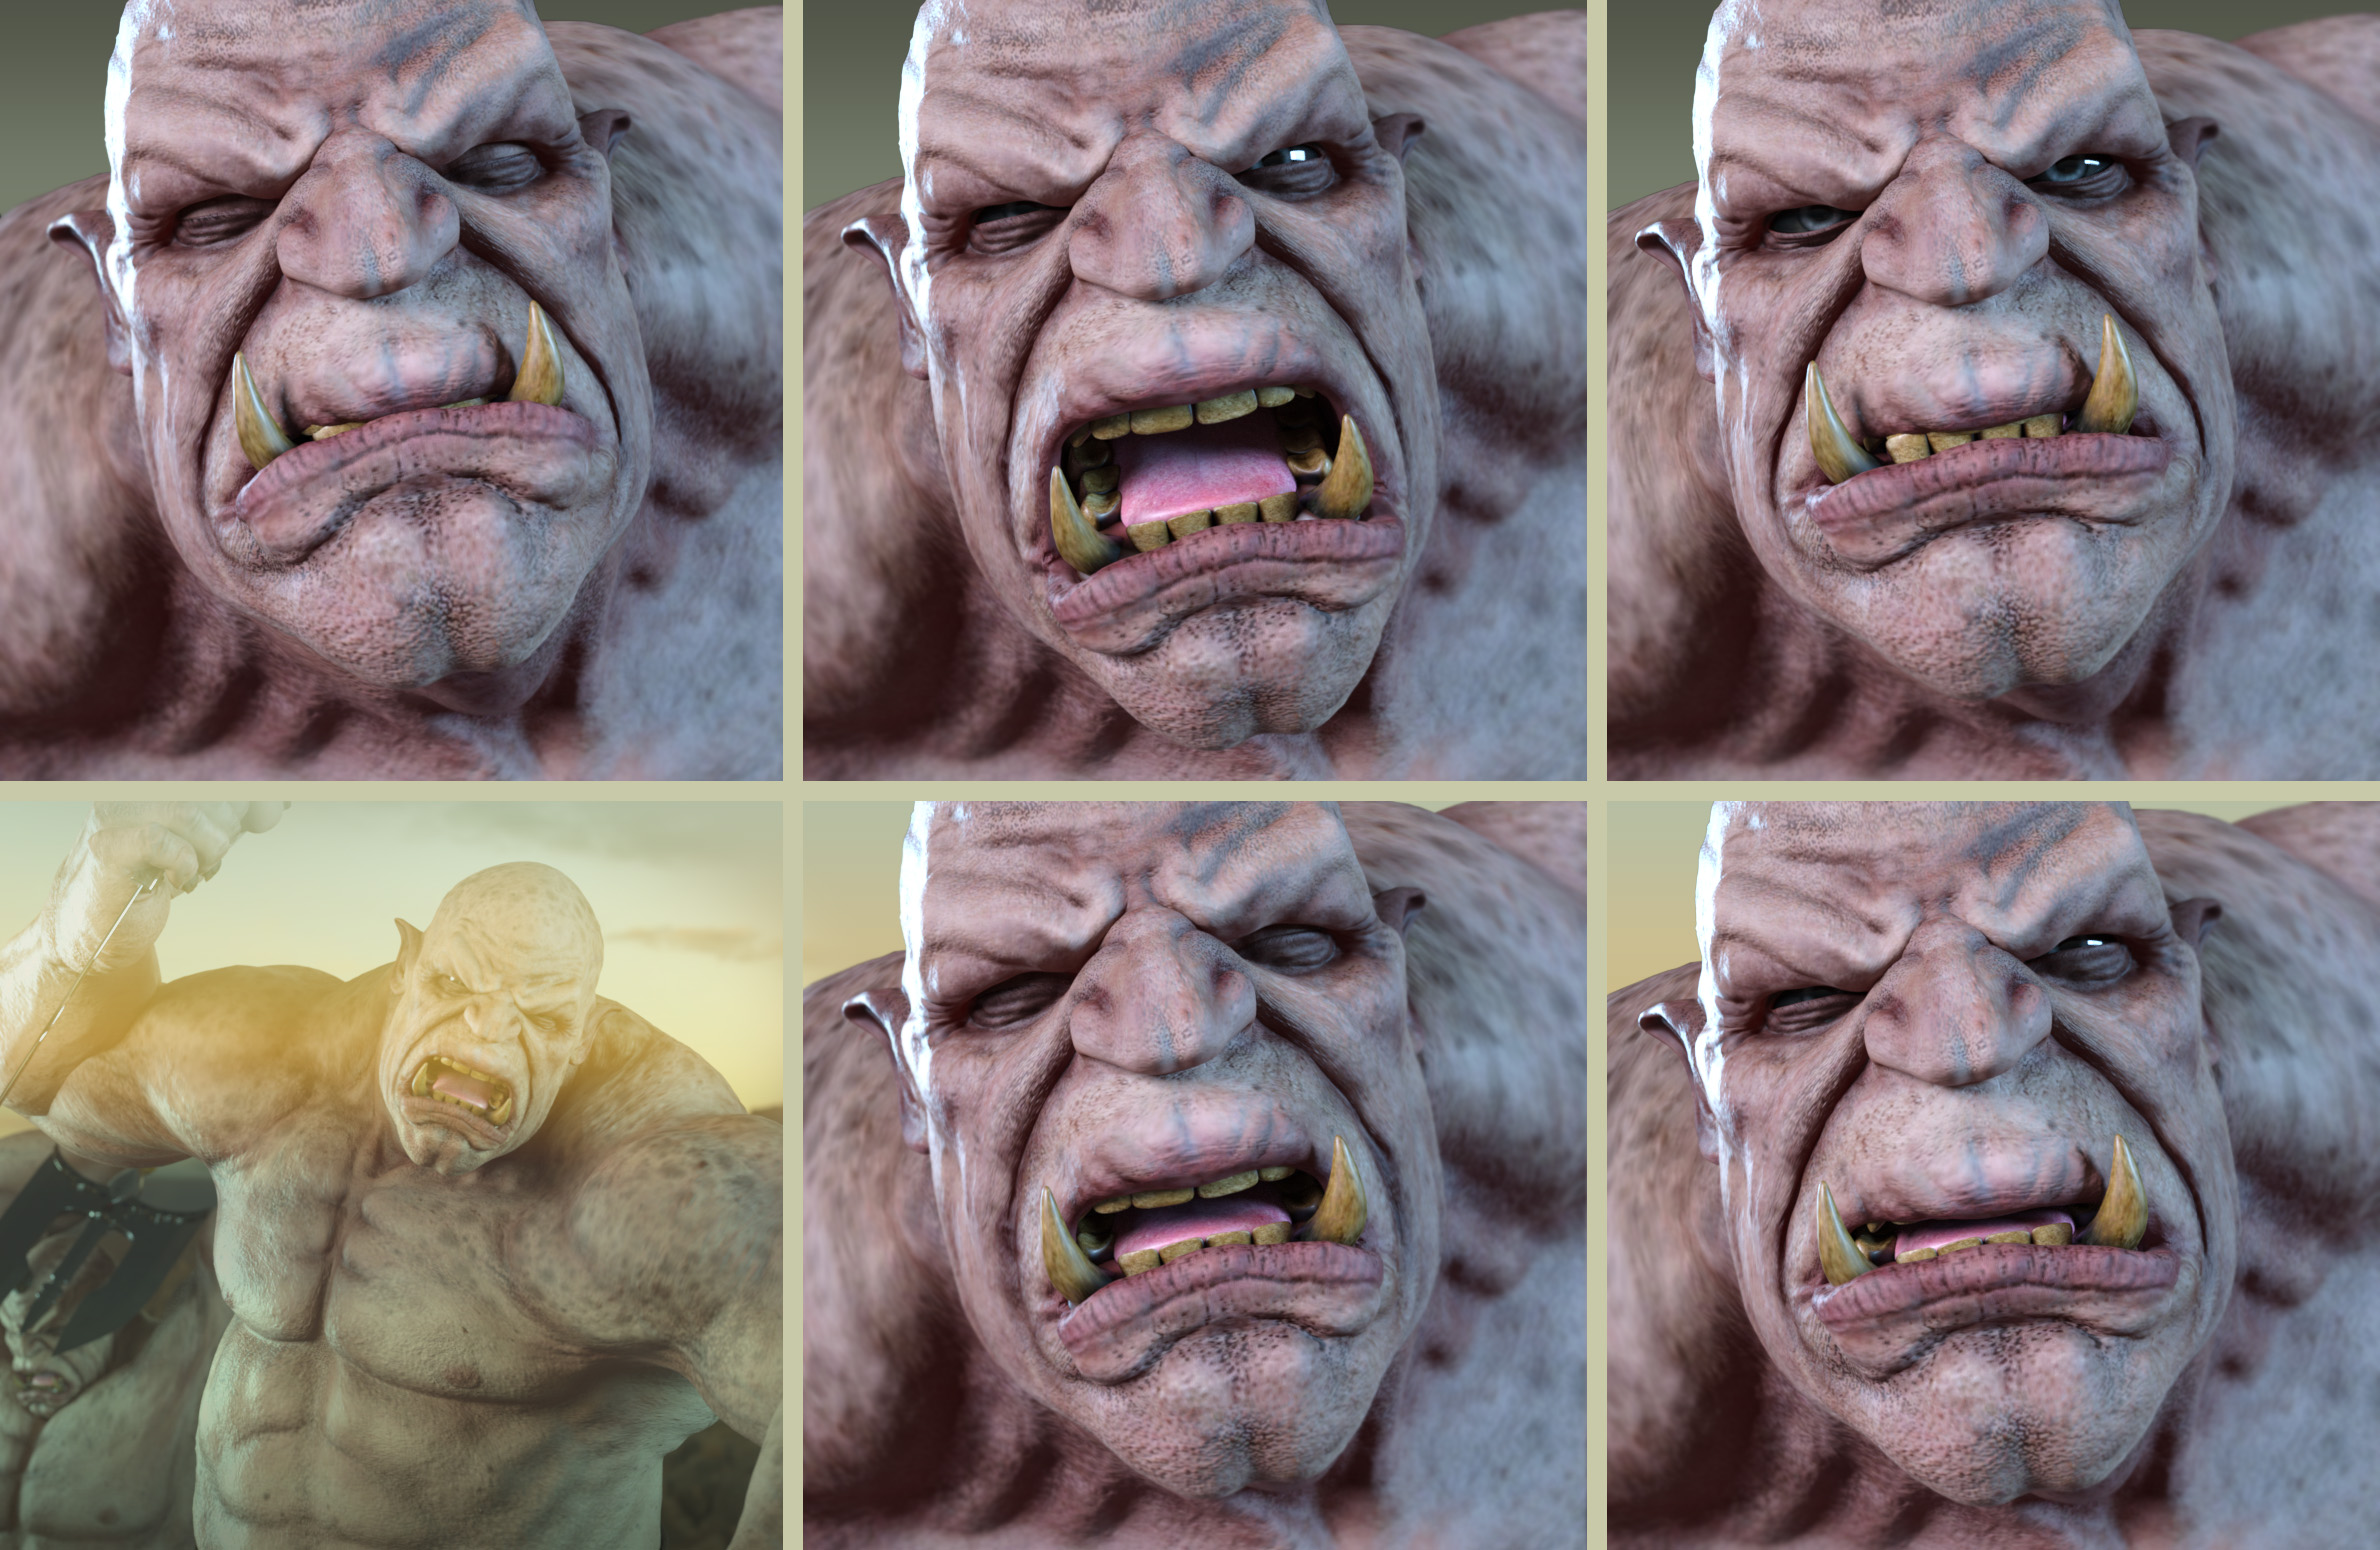 Z Merciless Warrior Poses and Expressions for Ogre HD by: Zeddicuss, 3D Models by Daz 3D